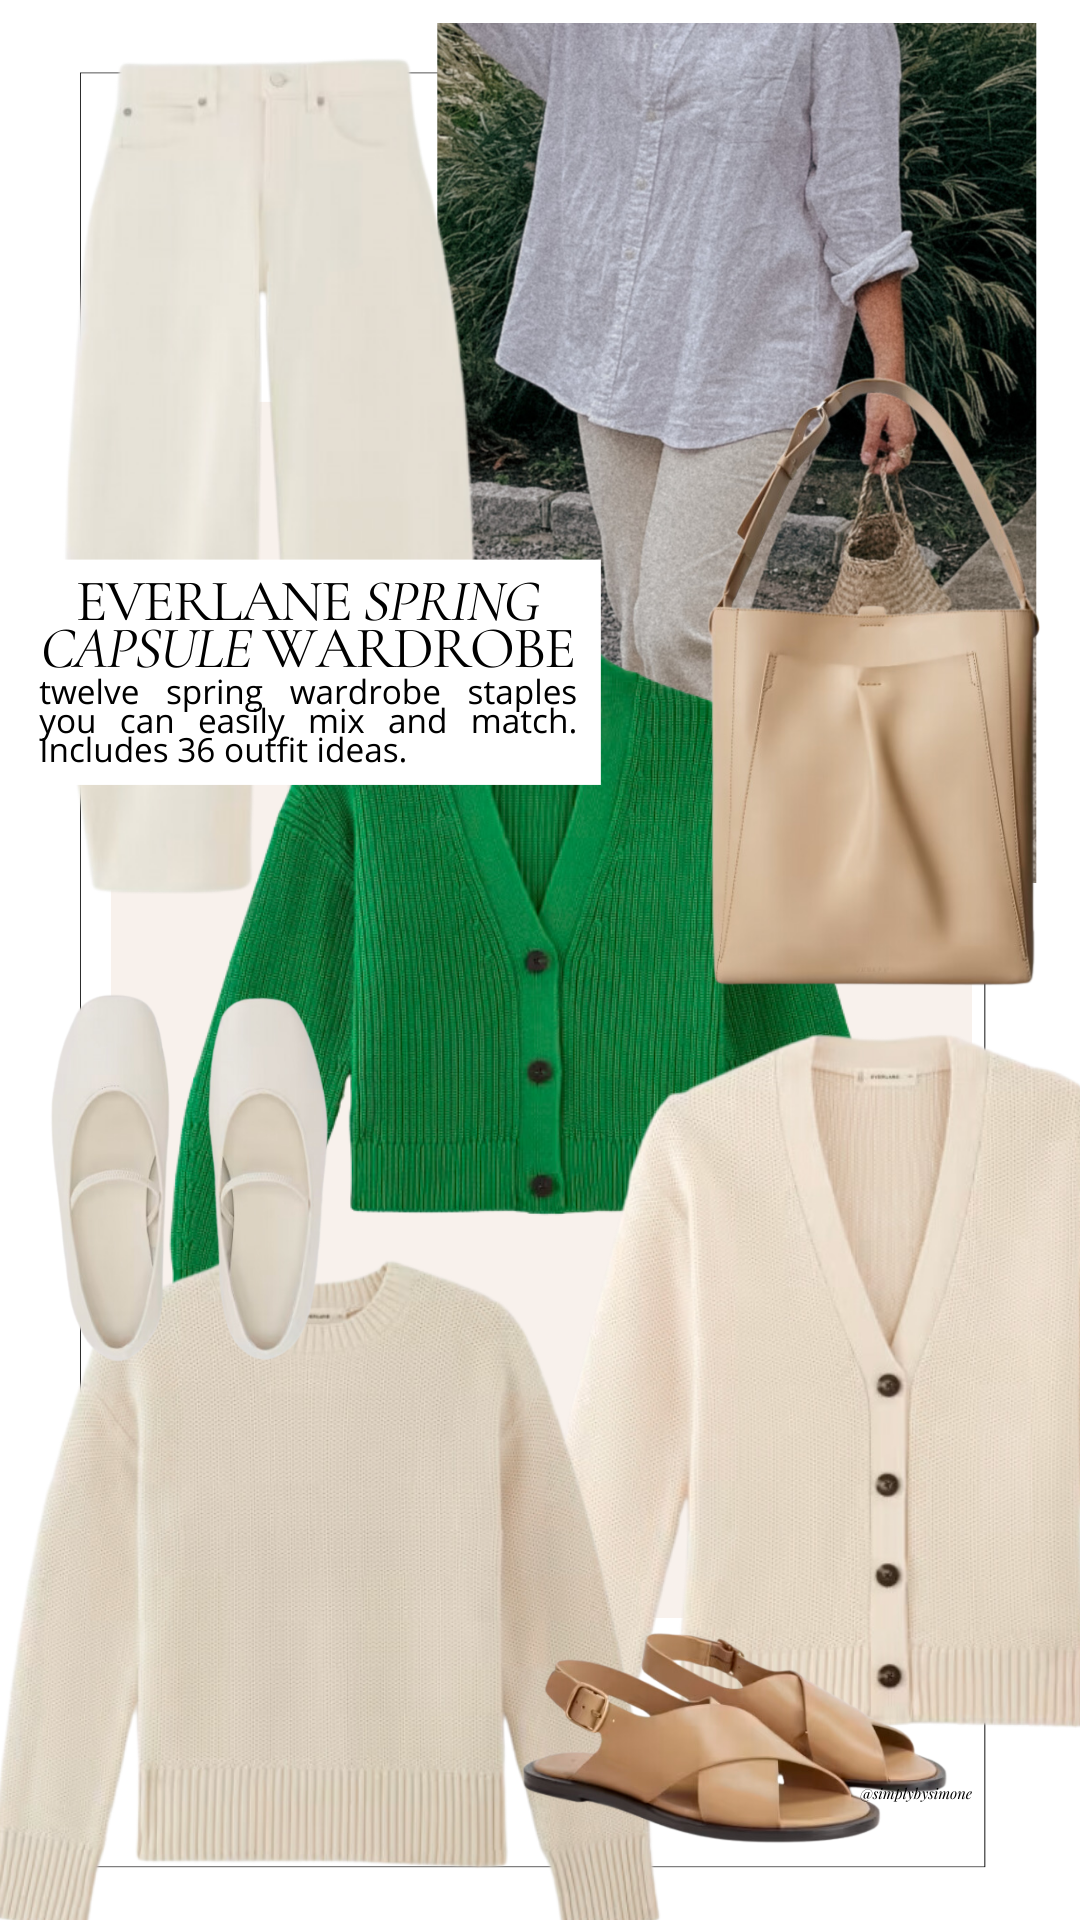 Collage of Everlane pieces for Spring featuring a Green cardigan, cream cardigan, white ballet flats - Cover Image